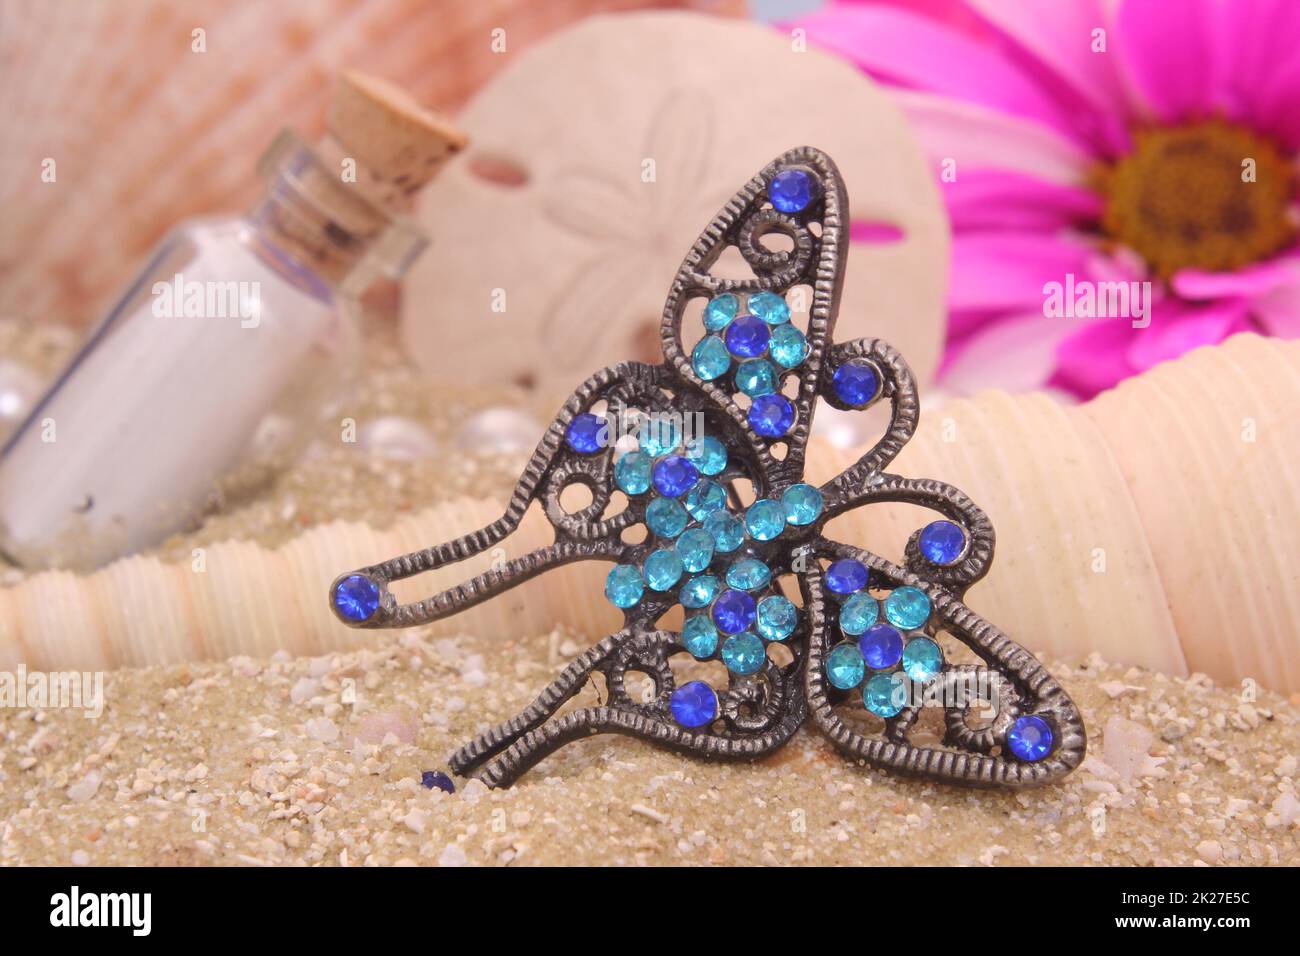 Sea Shells With Flower and Jewelry on Sandy Beach Stock Photo